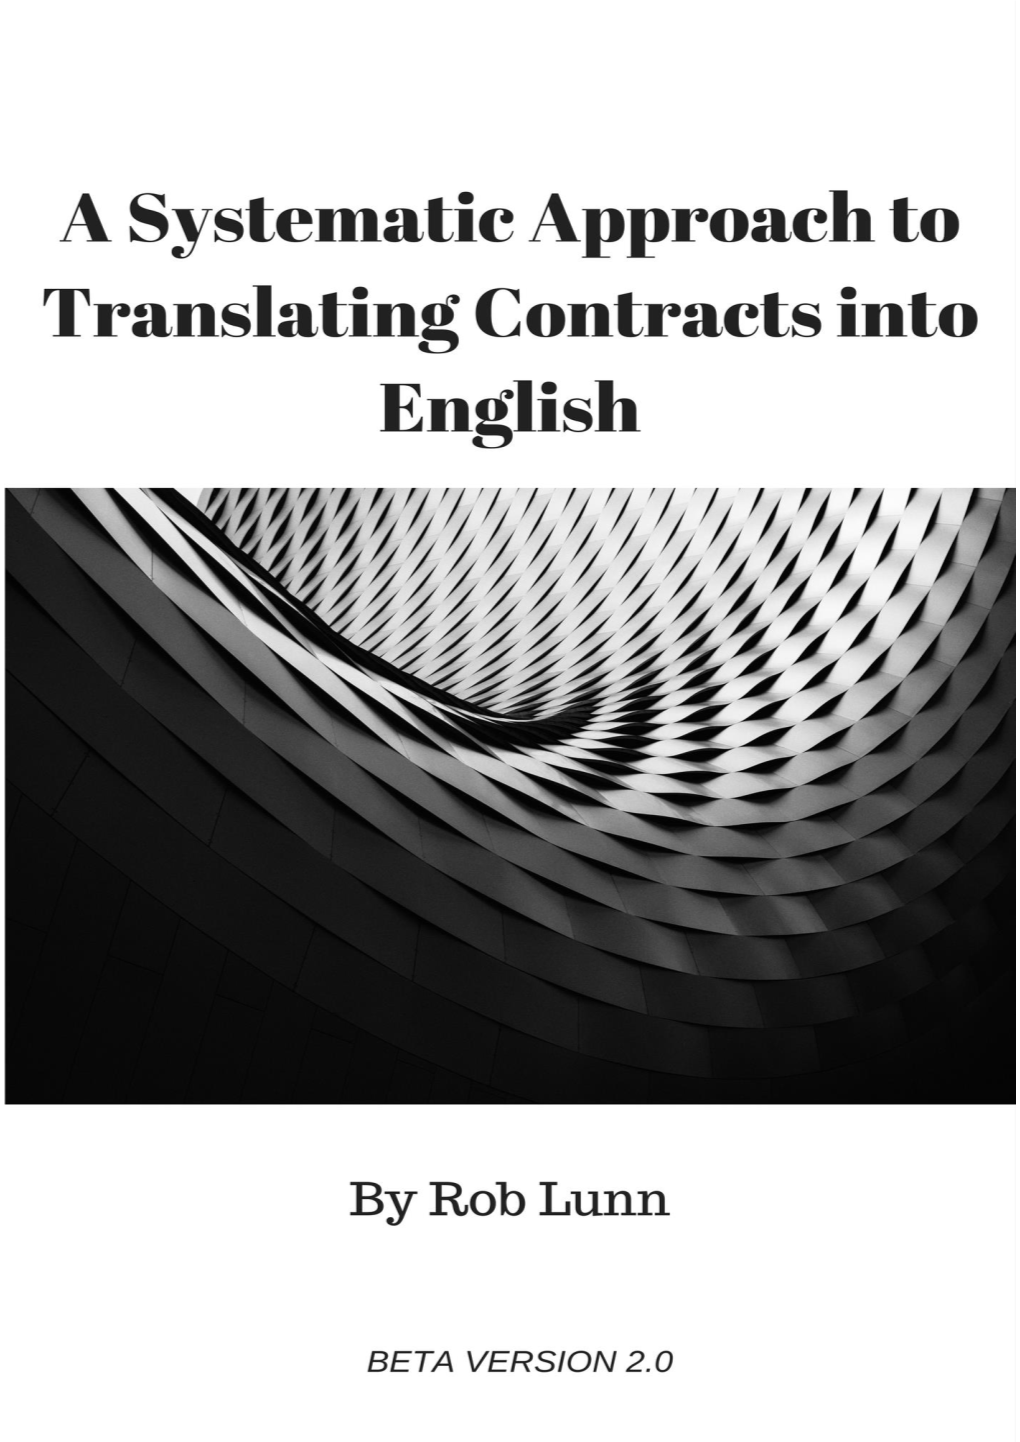 A Systematic Approach to Translating Contracts Into English